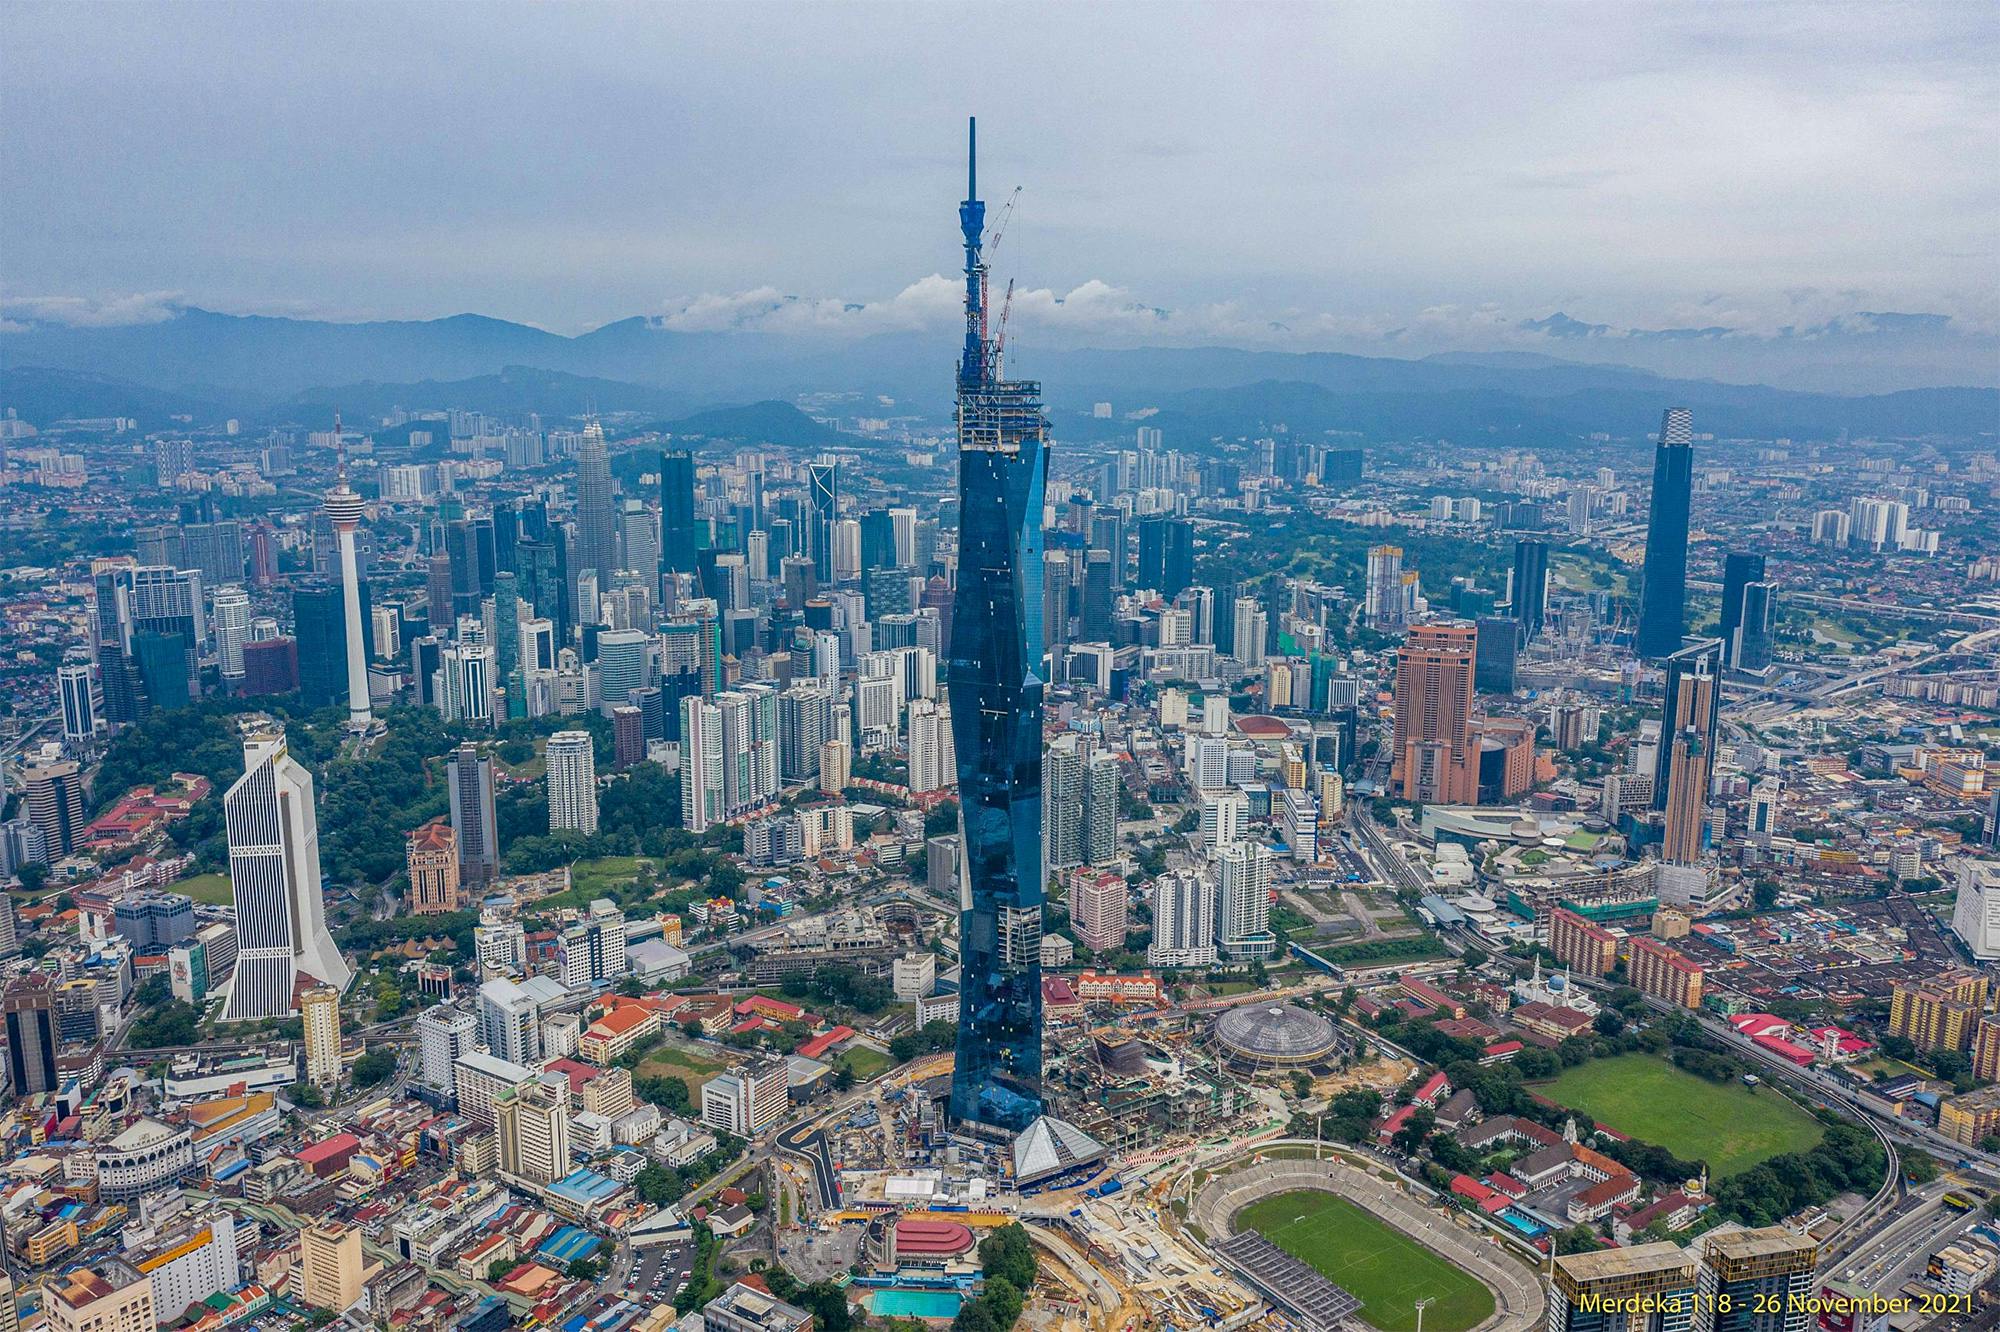 malaysia-s-merdeka-118-tower-the-world-s-second-tallest-building-tops